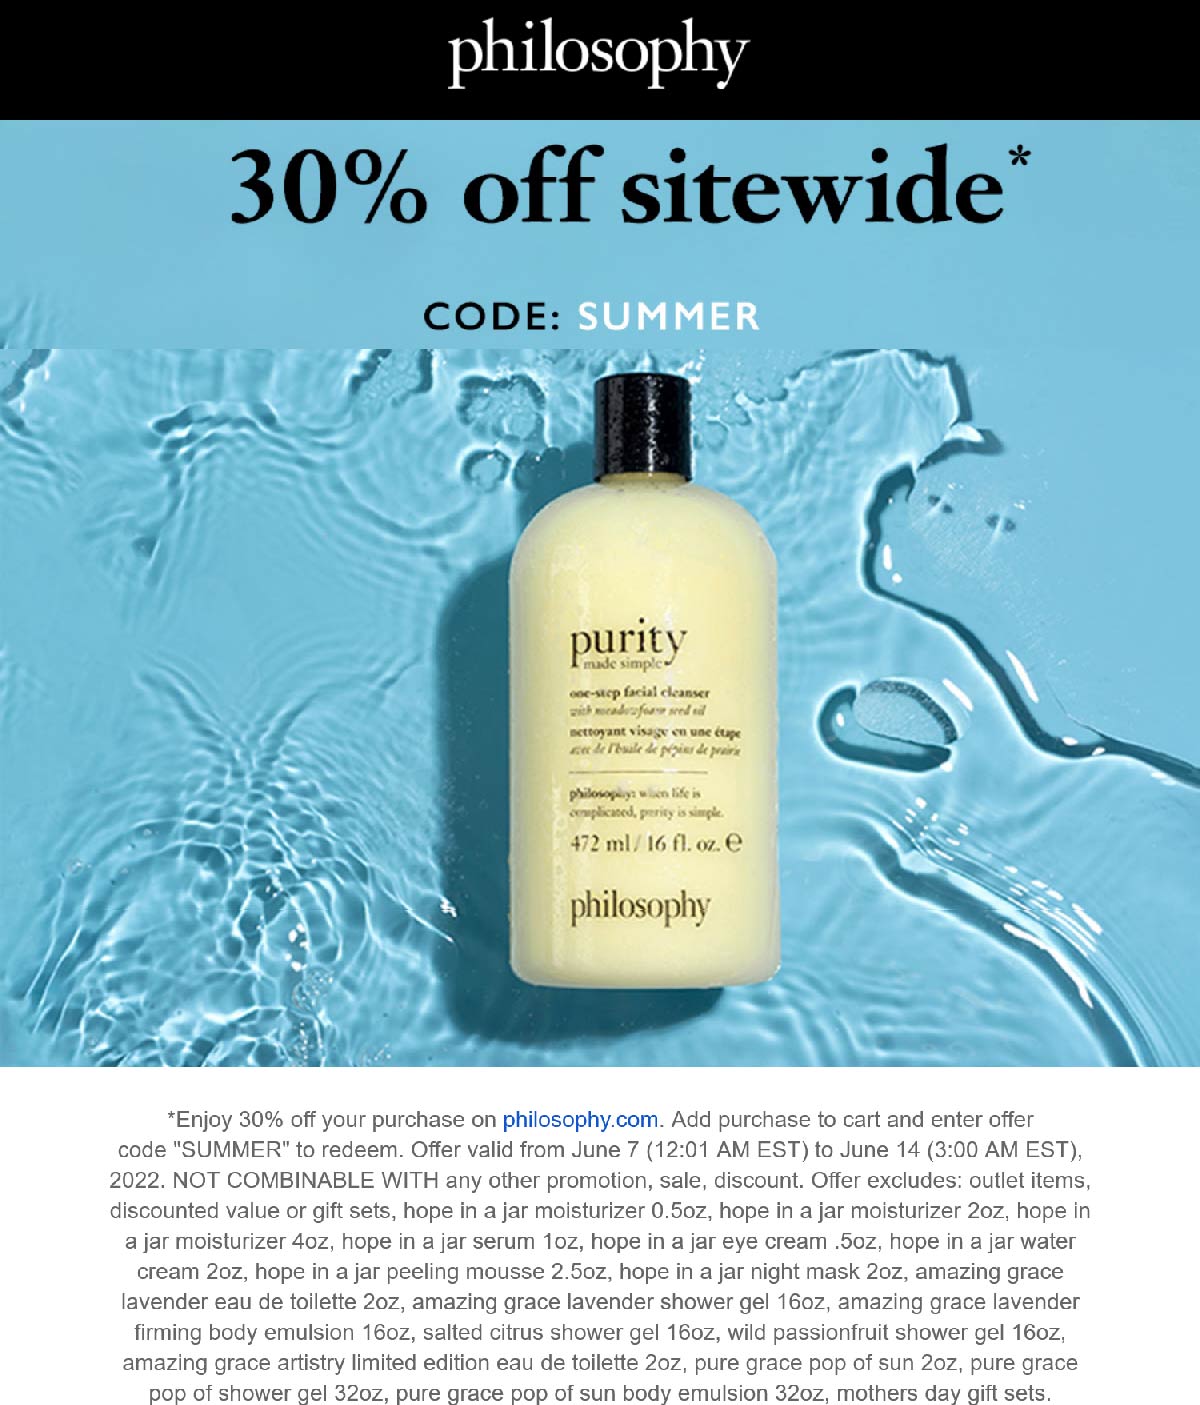 Philosophy stores Coupon  30% off everything online at Philosophy via promo code SUMMER #philosophy 